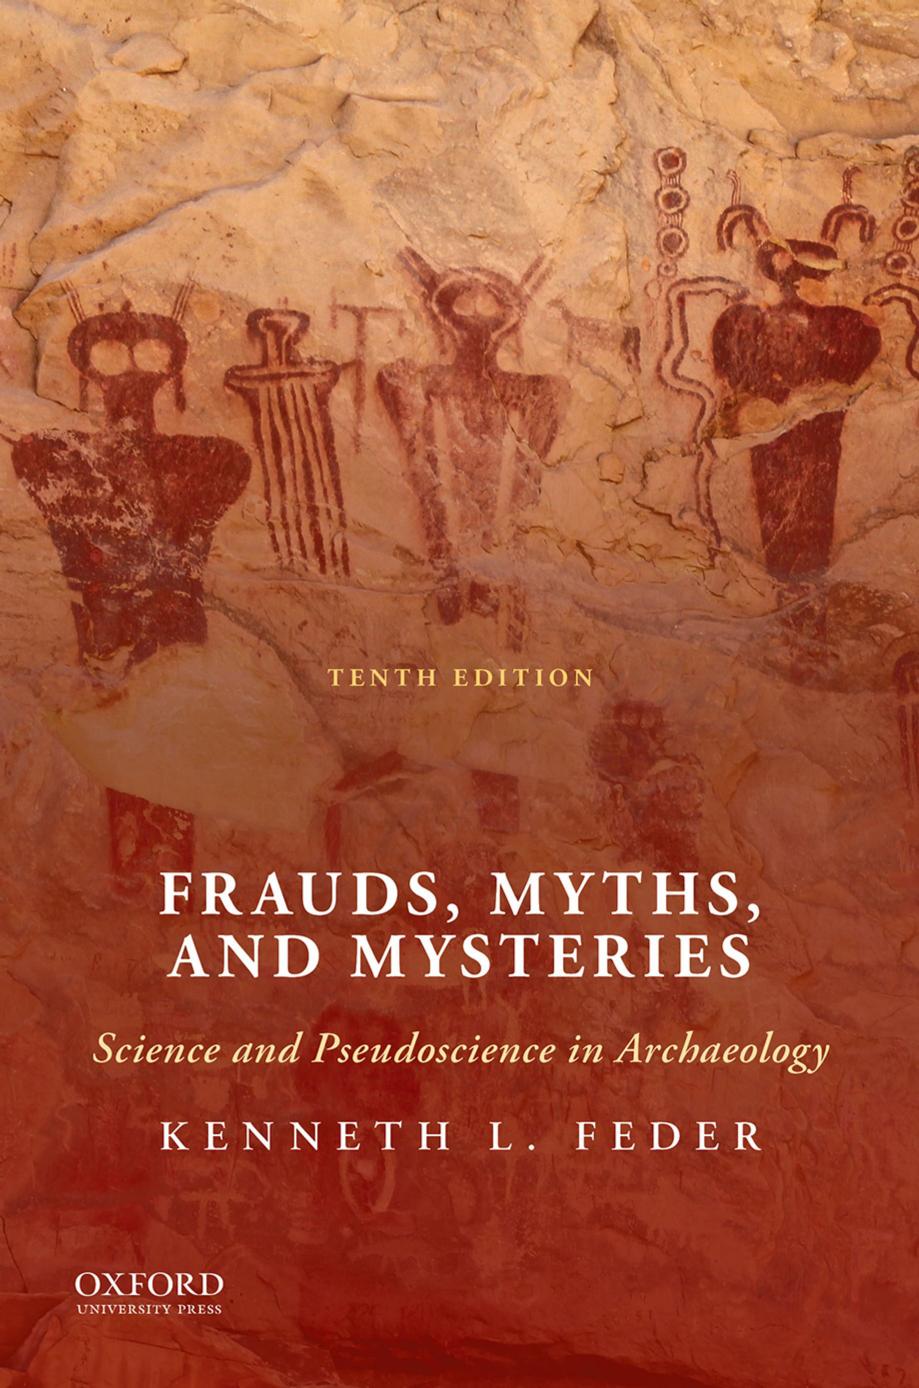 (eBook PDF)Frauds, Myths, and Mysteries: Science and Pseudoscience in Archaeology 10th Edition by Kenneth L. Feder